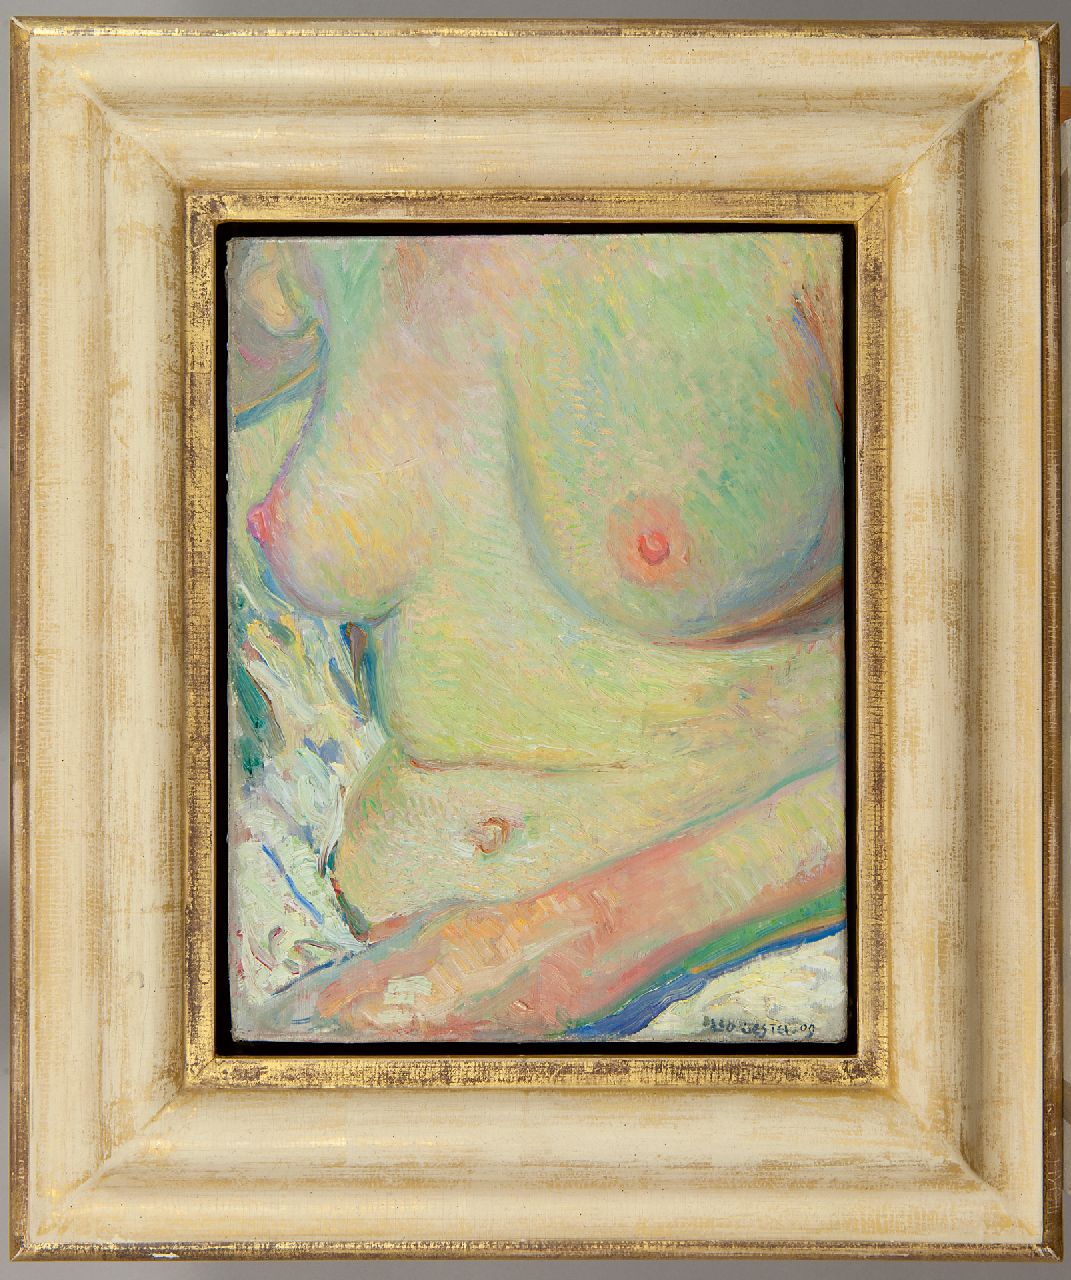 Gestel L.  | Leendert 'Leo' Gestel | Paintings offered for sale | Woman bathing, oil on canvas 33.5 x 25.6 cm, signed l.r. and dated '09